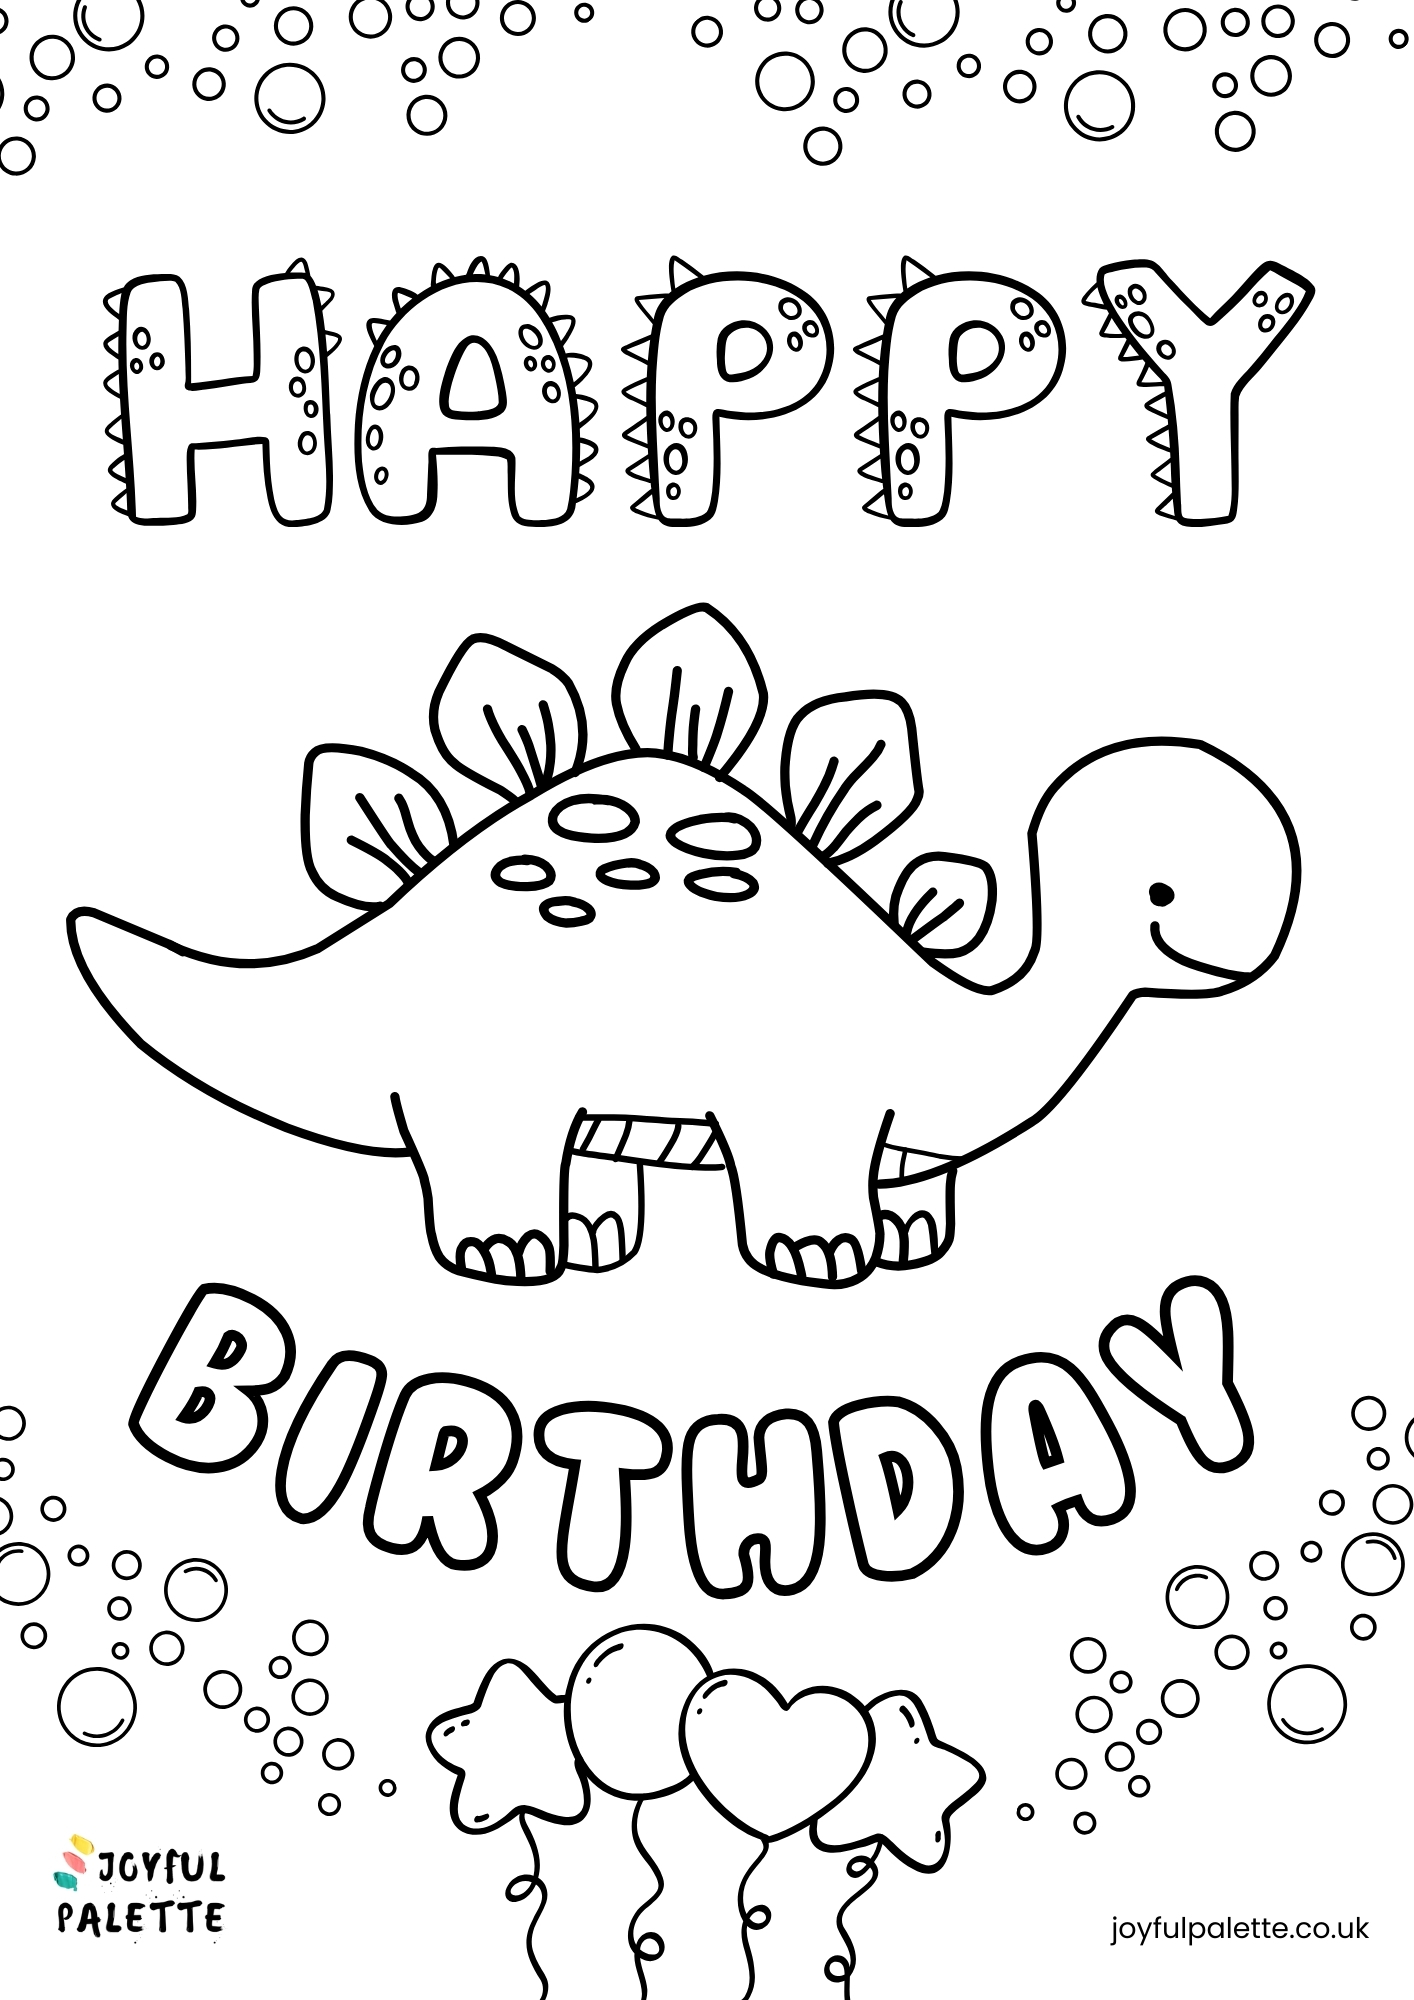 Happy Birthday Coloring Pages - Joyful Palette